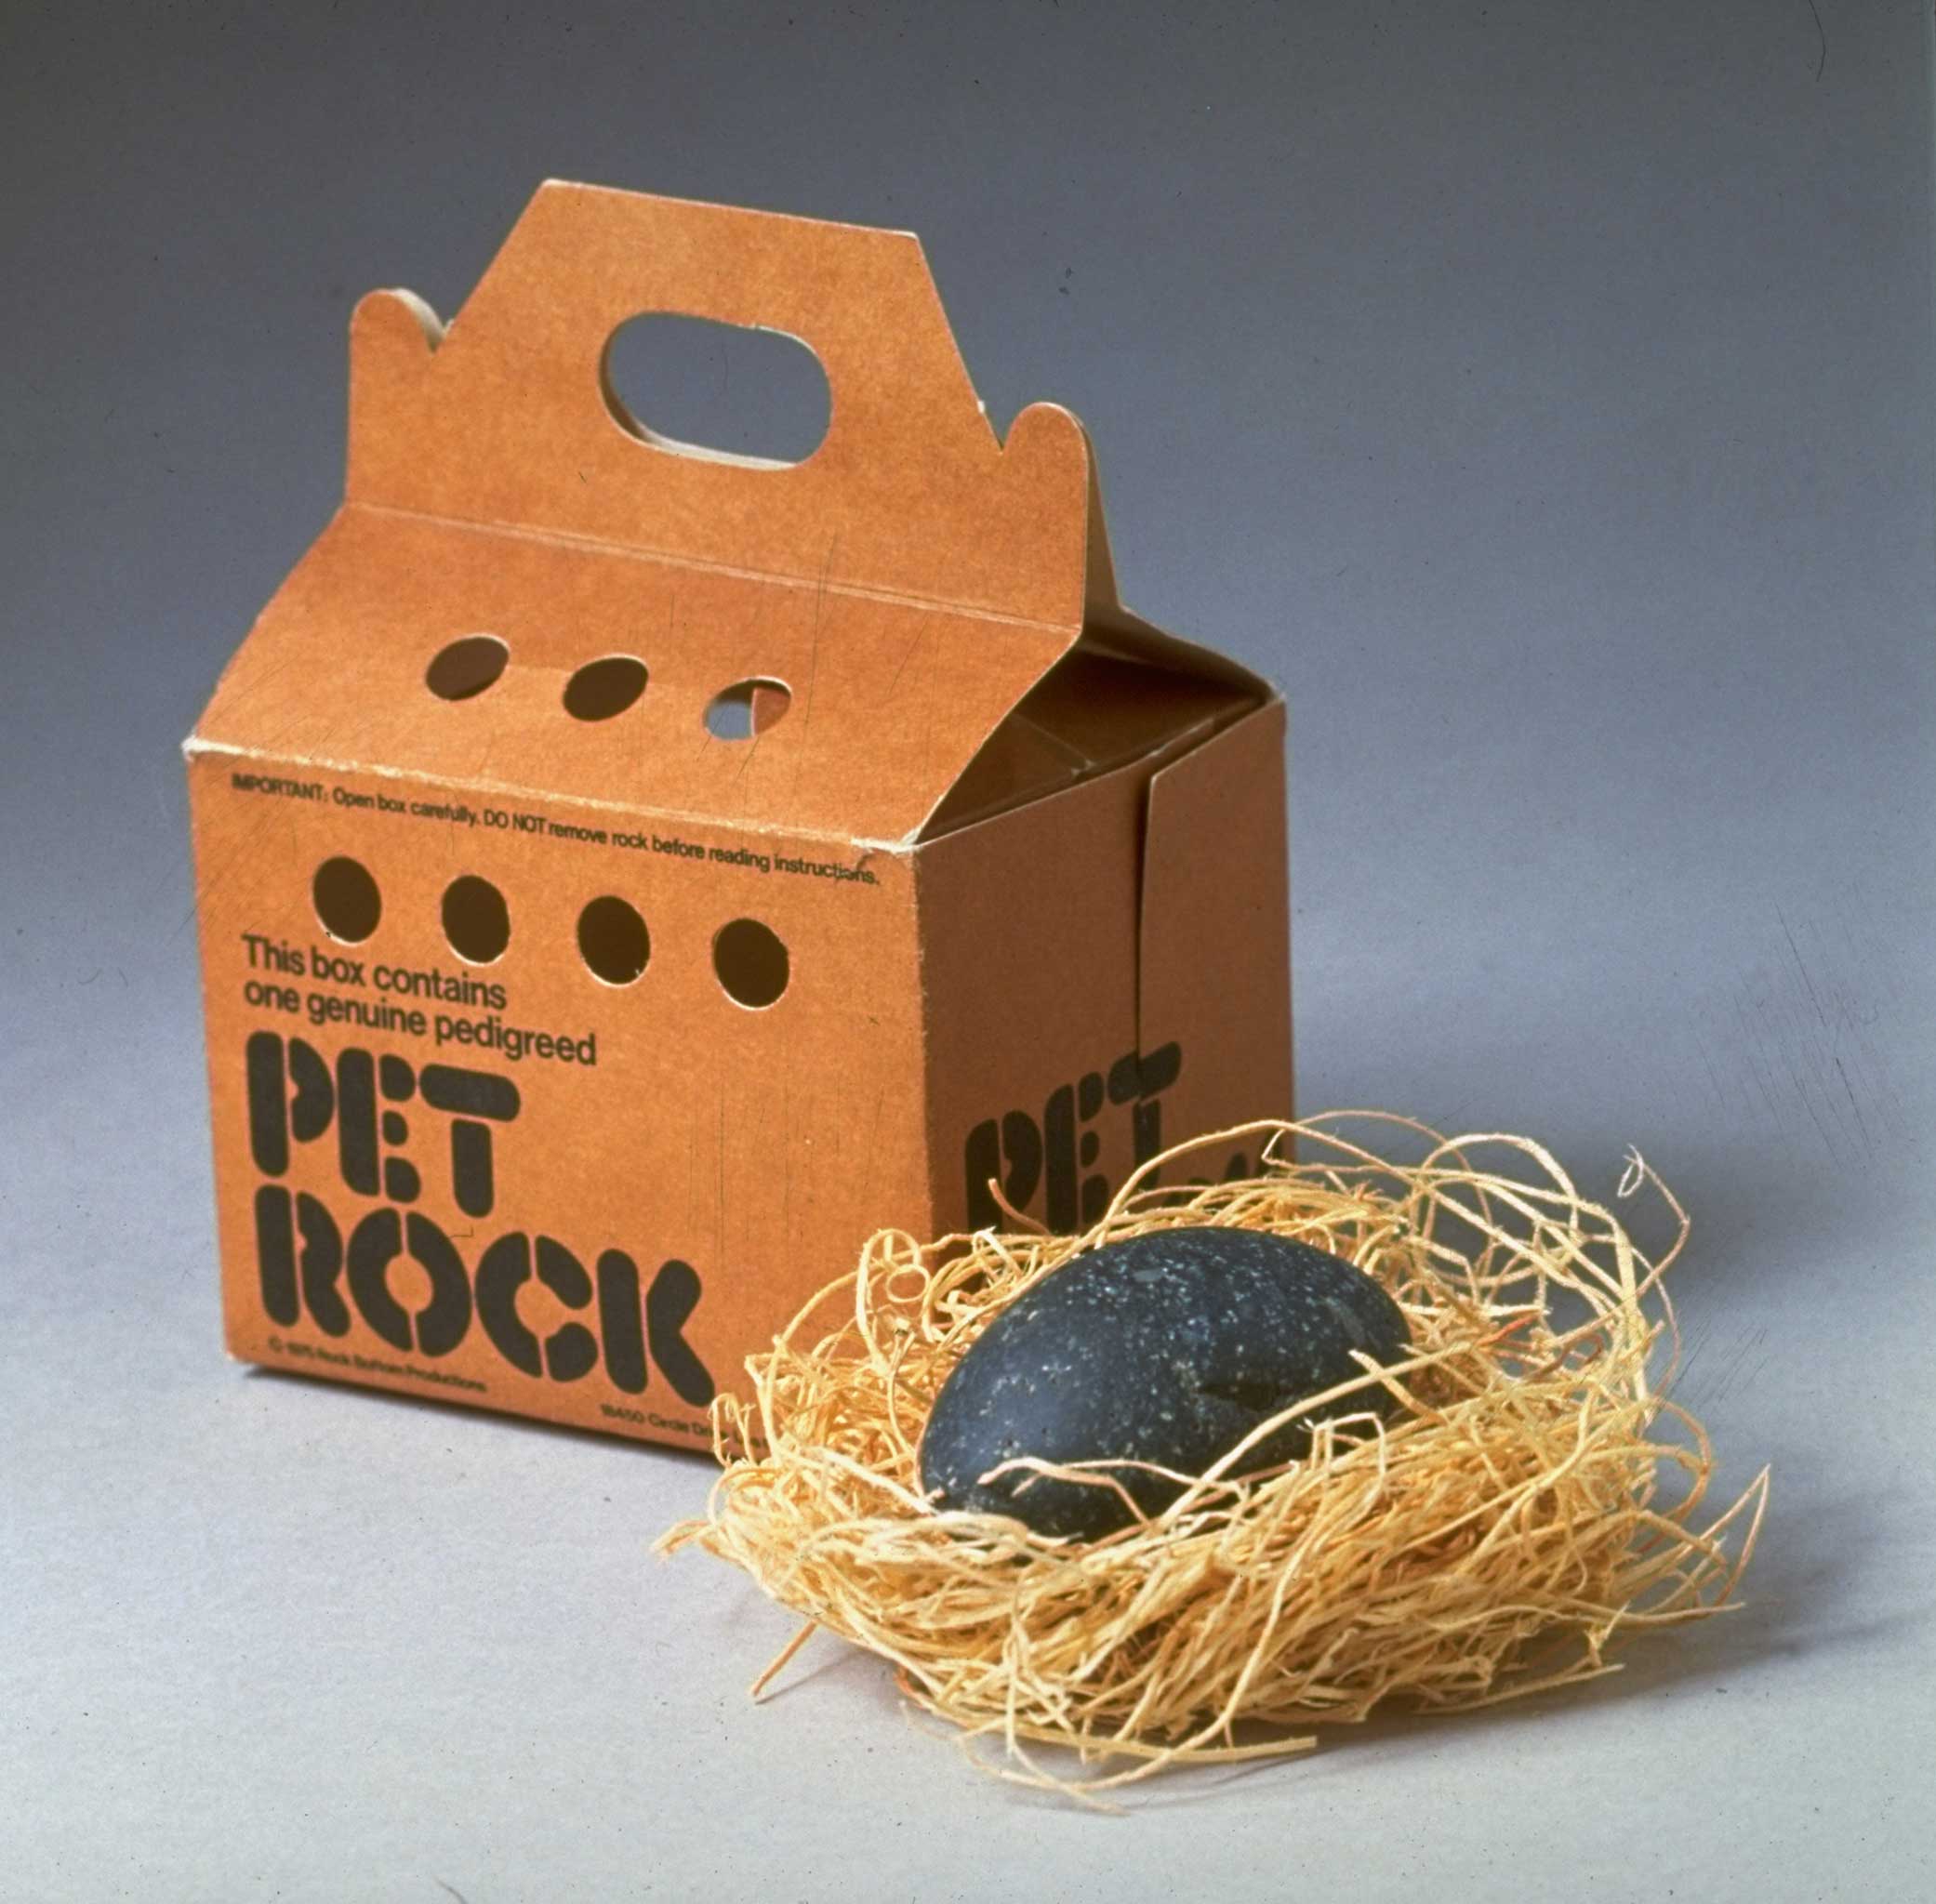 Product shot of Pet Rock, fad from mid-1970s, displayed w. its own carrying case. (Al Freni—The LIFE Images Collection/Getty)